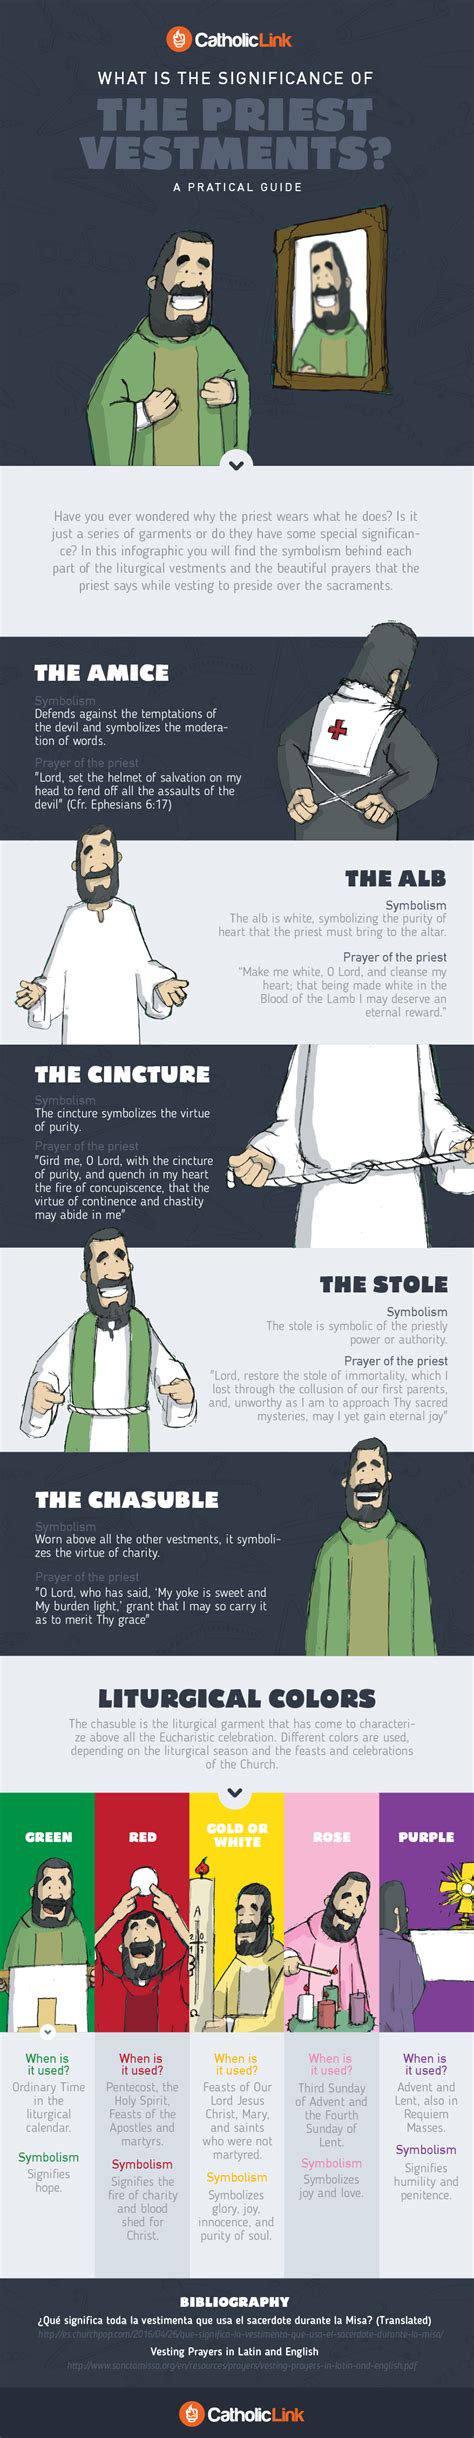 What Is The Meaning Behind The Priests Vestments A Practical Guide